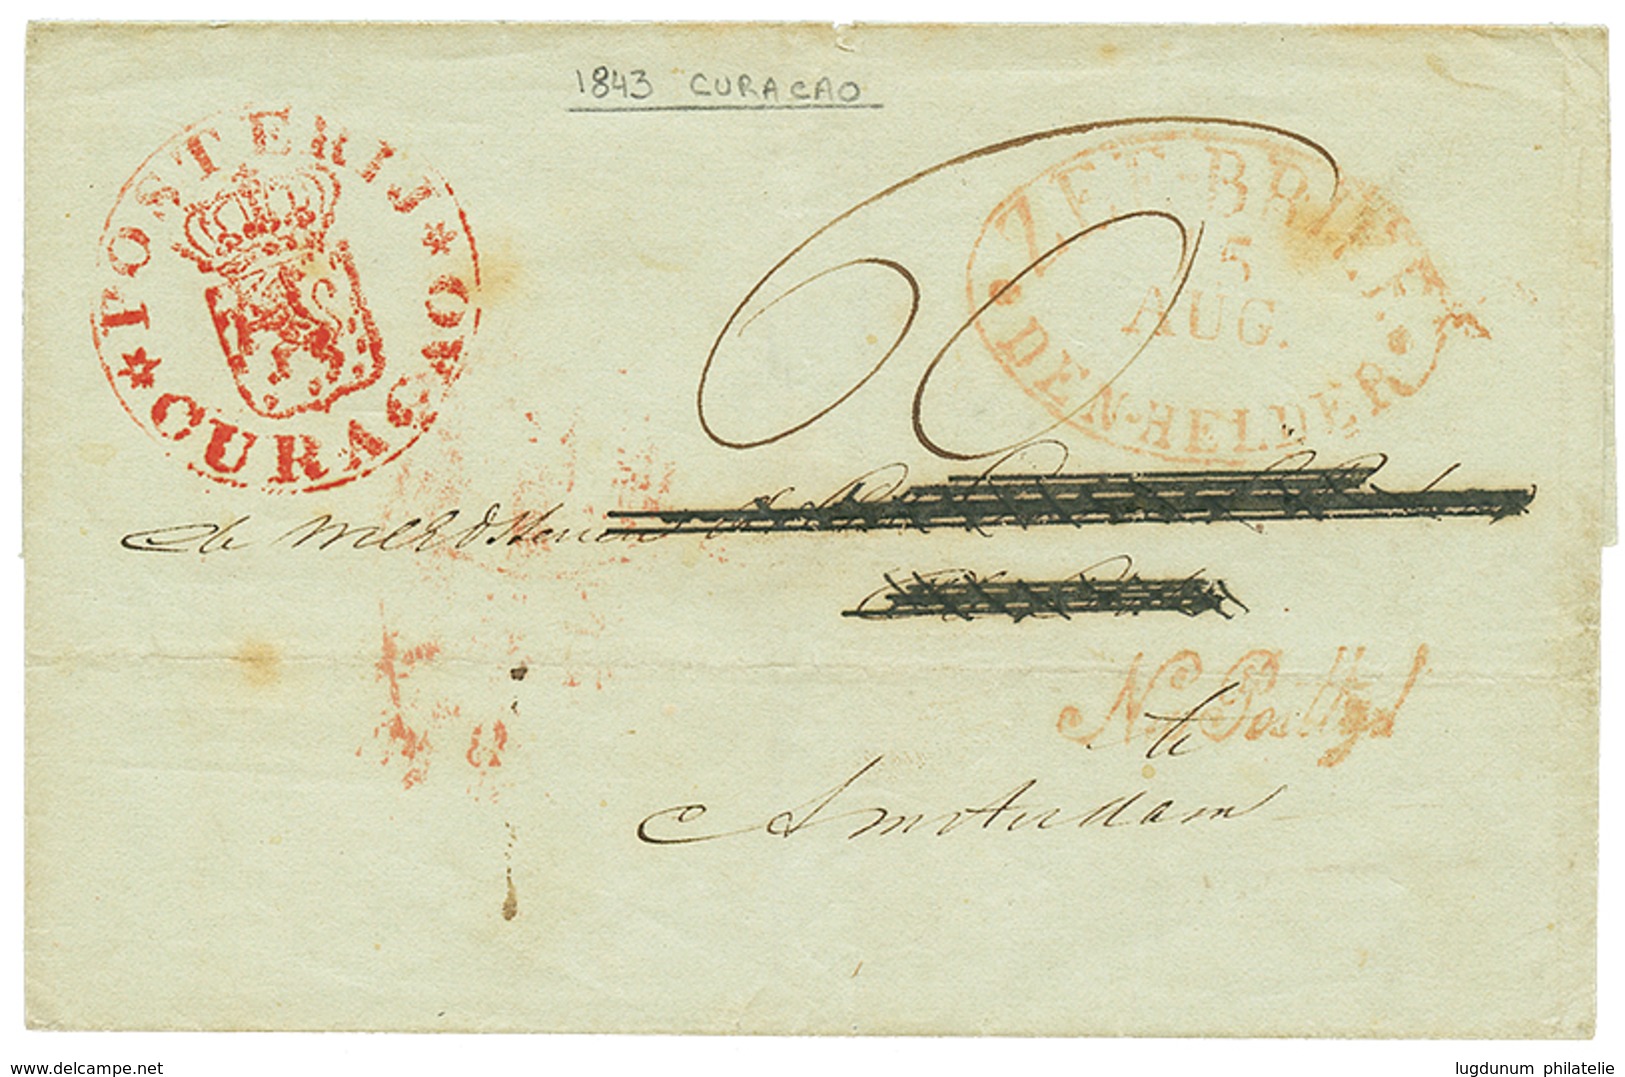 CURACAO : 1846 POSTERIJ CURACAO In Red + ZEEBRIEF/DEN HELDER + NA POSTTYL On Entire (name Erased) From CURACAO To AMSTER - Curacao, Netherlands Antilles, Aruba